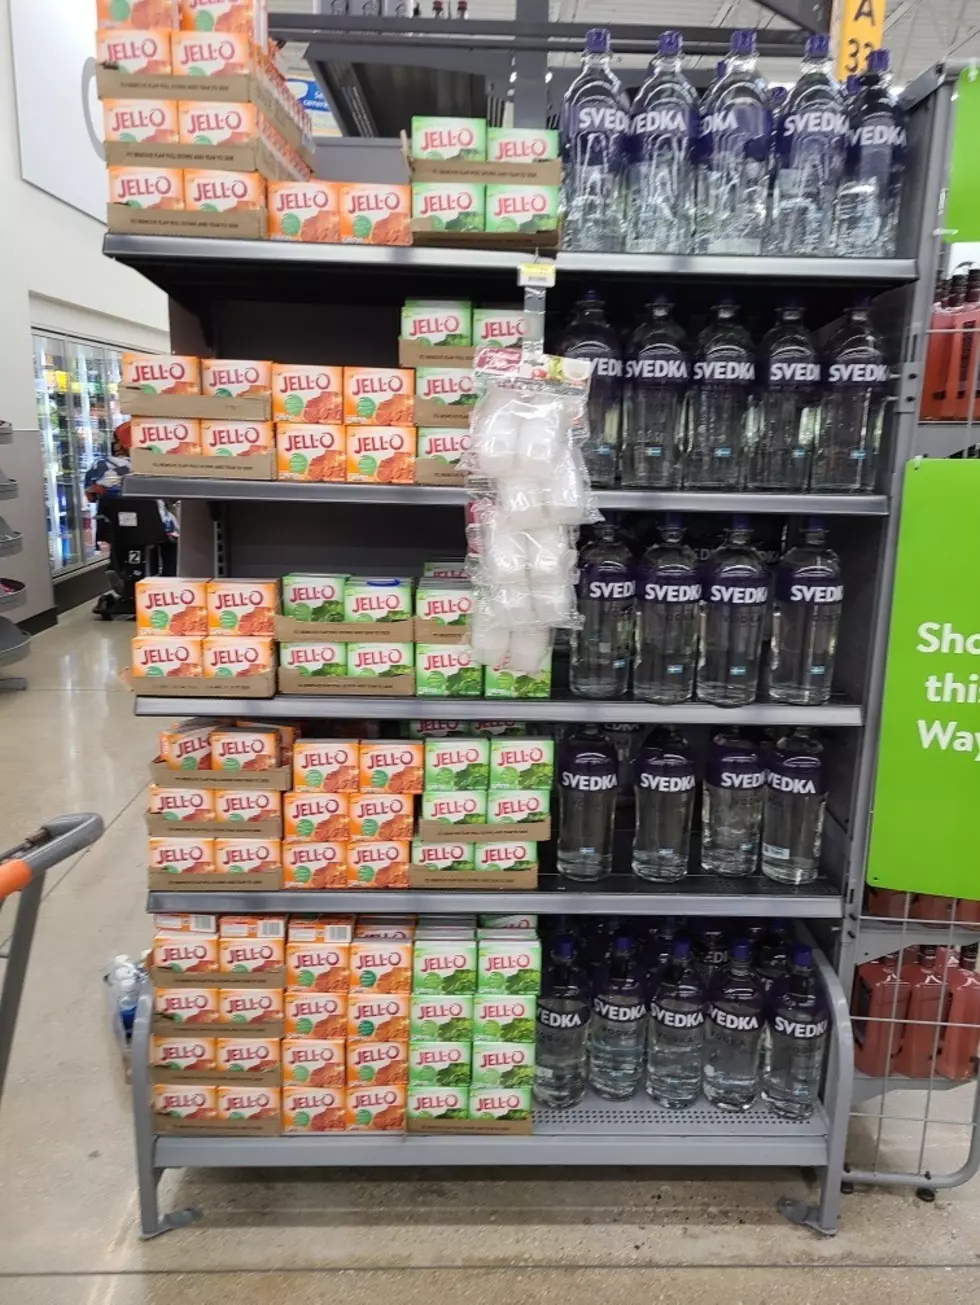 Rockford Walmart Shelves Hilariously Prepare Parents for the School Year